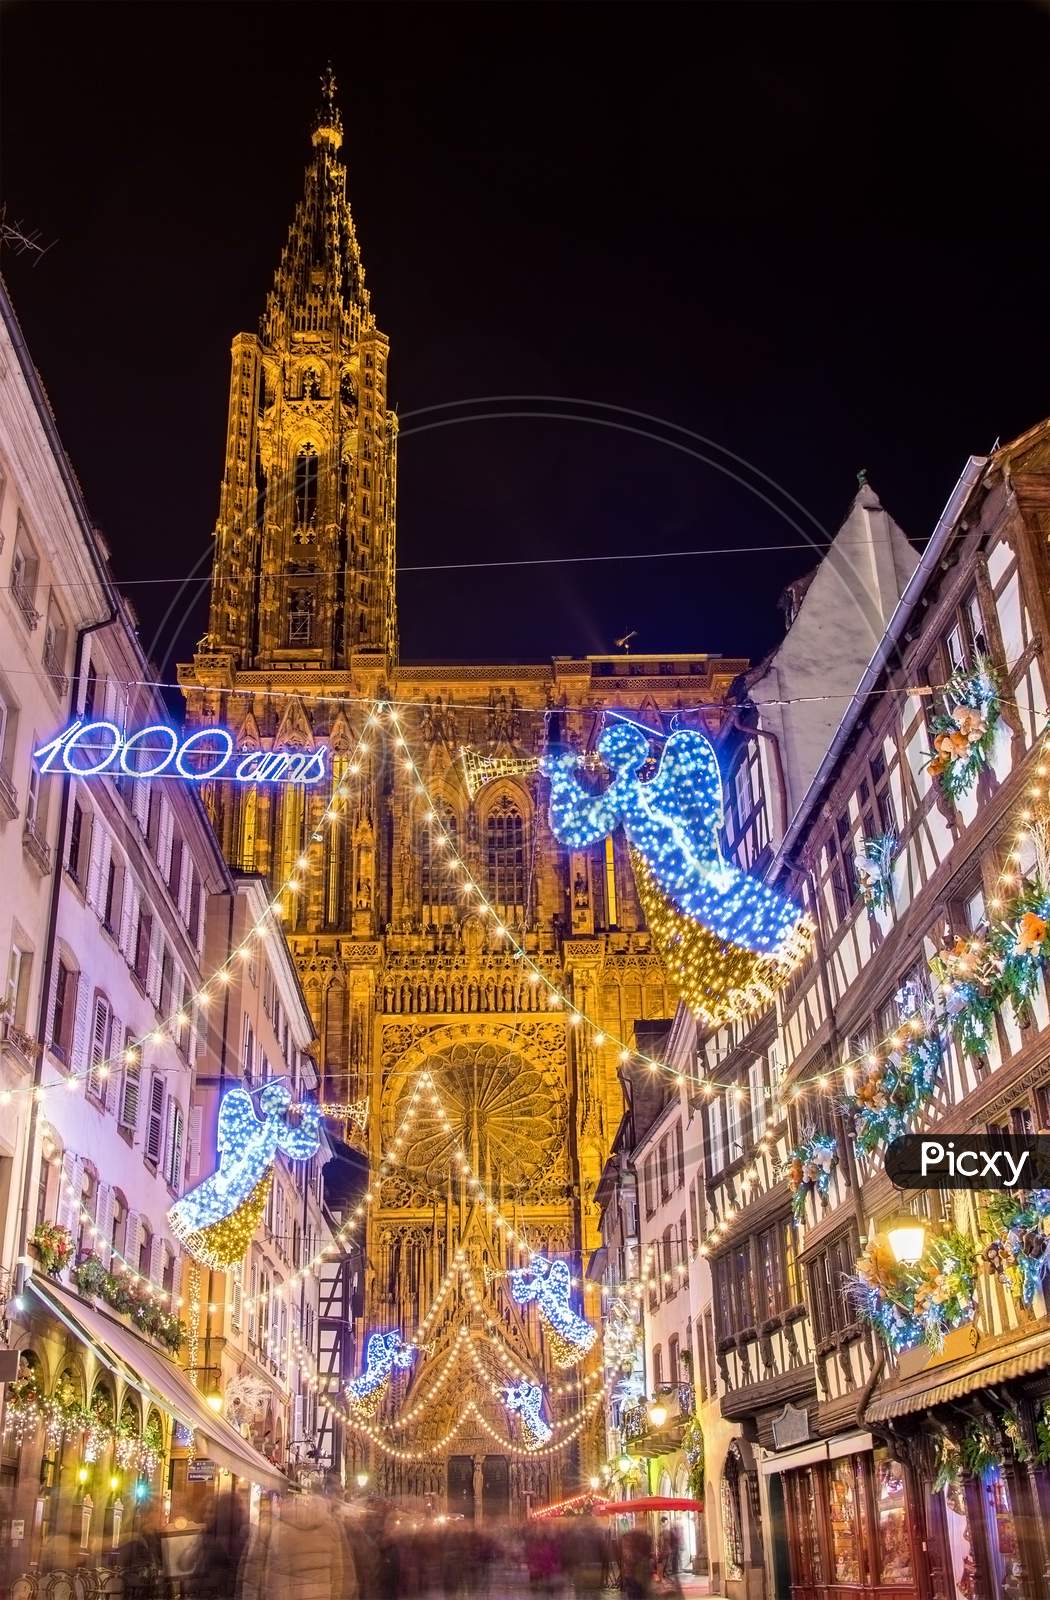 Christmas Decorations Near The Cathedral - Strasbourg, France